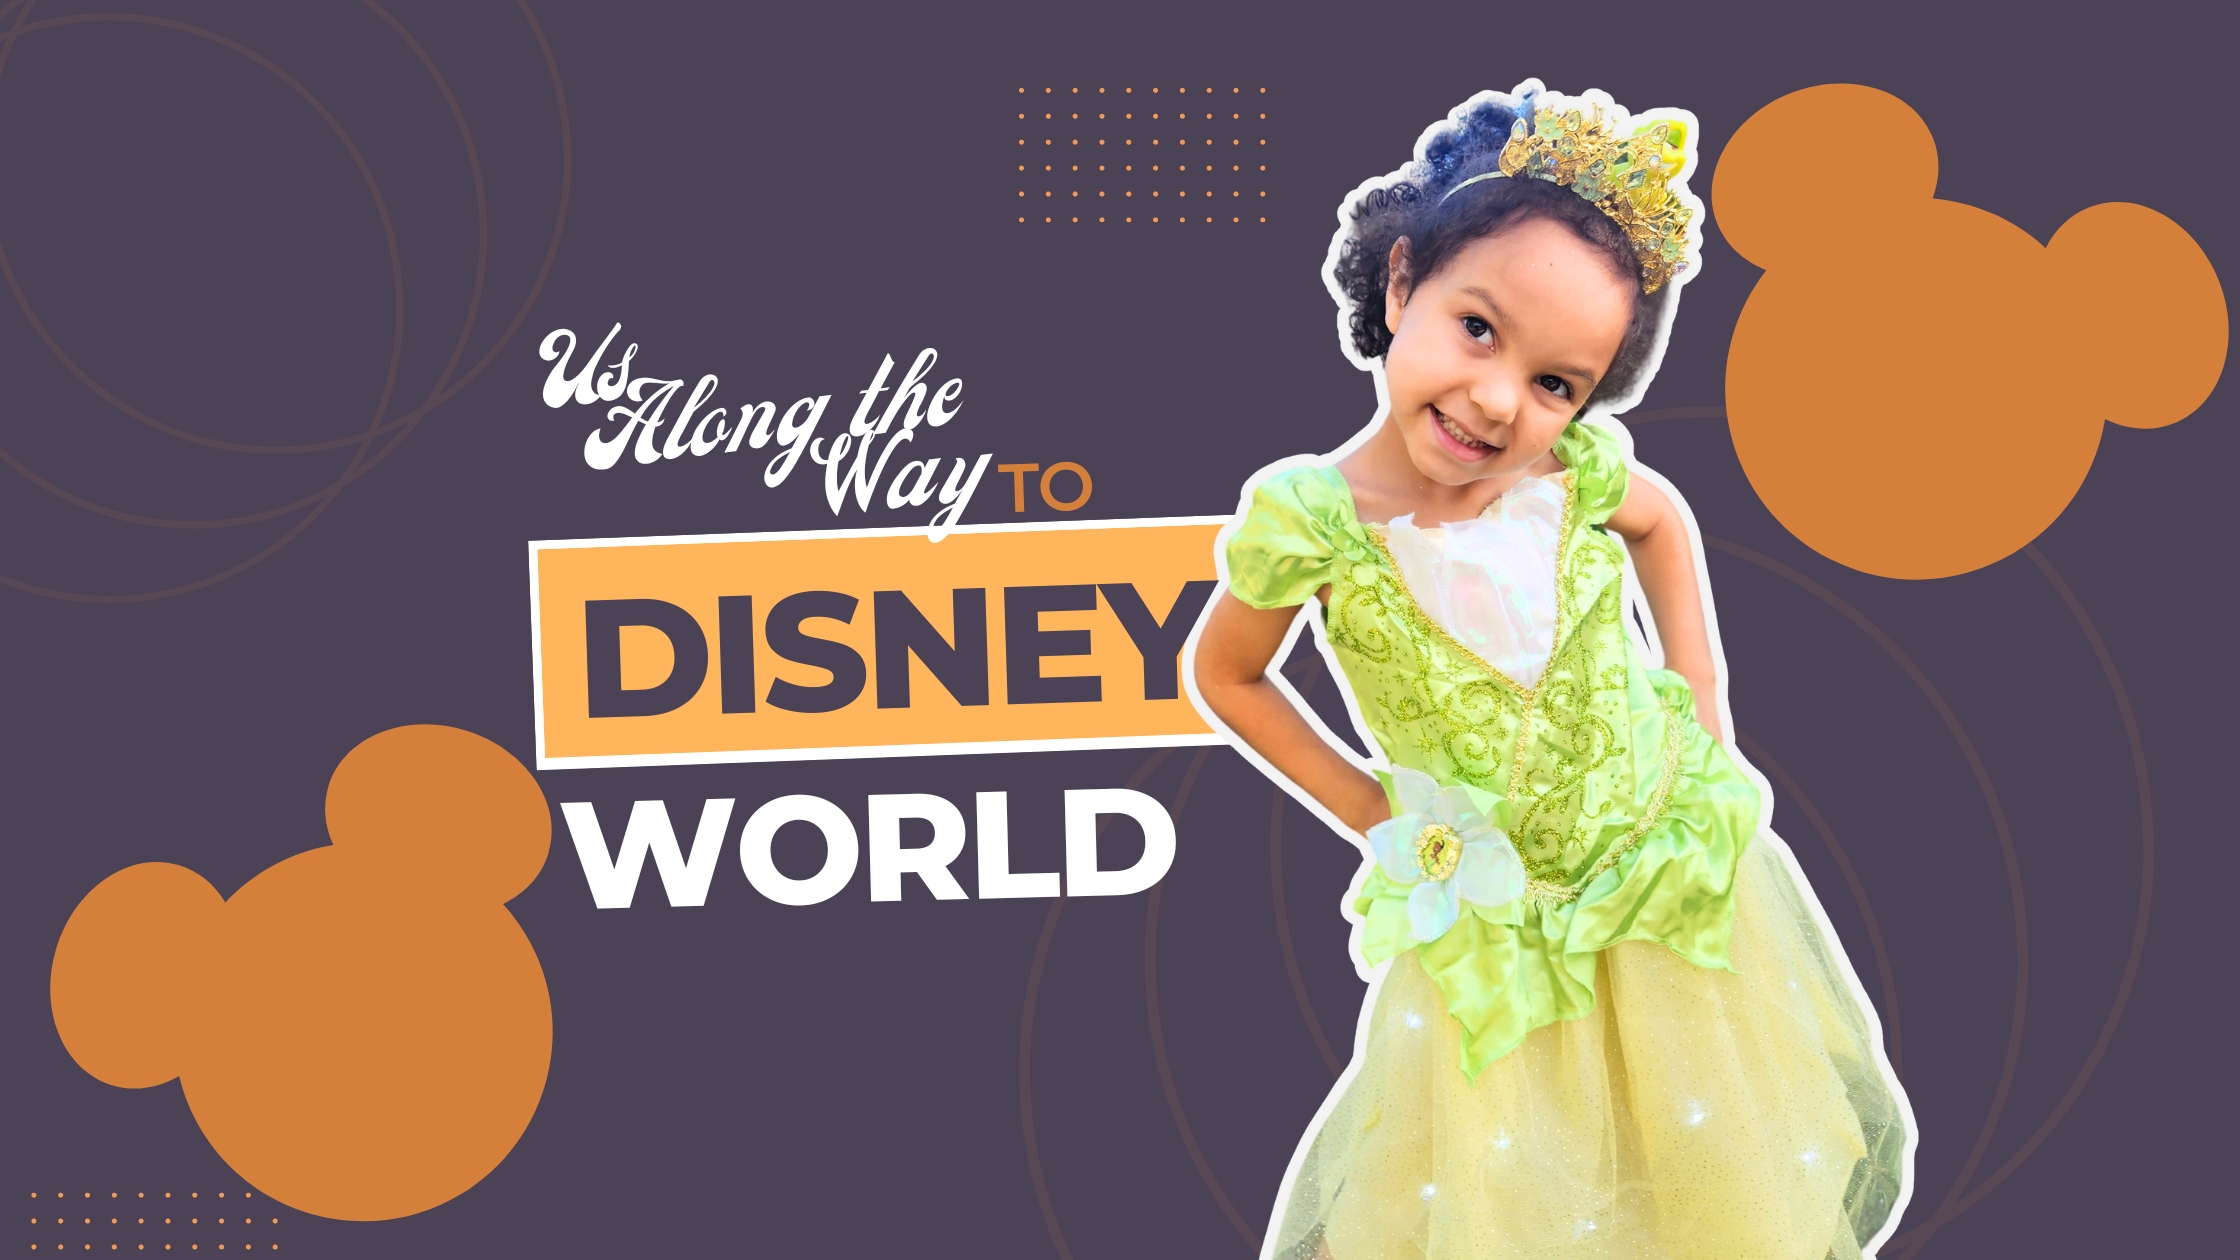 This image features a promotional banner for a family blog titled "Us Along the Way to DISNEY WORLD". The background is a deep purple with decorative orange Mickey Mouse ear silhouettes and dotted patterns. On the right side, there's a young girl smiling joyfully, dressed as Princess Tiana from Disney's "The Princess and the Frog", complete with a tiara and a full, sparkling green gown. The text and the girl's costume pop against the background, conveying excitement for an upcoming trip to Disney World.